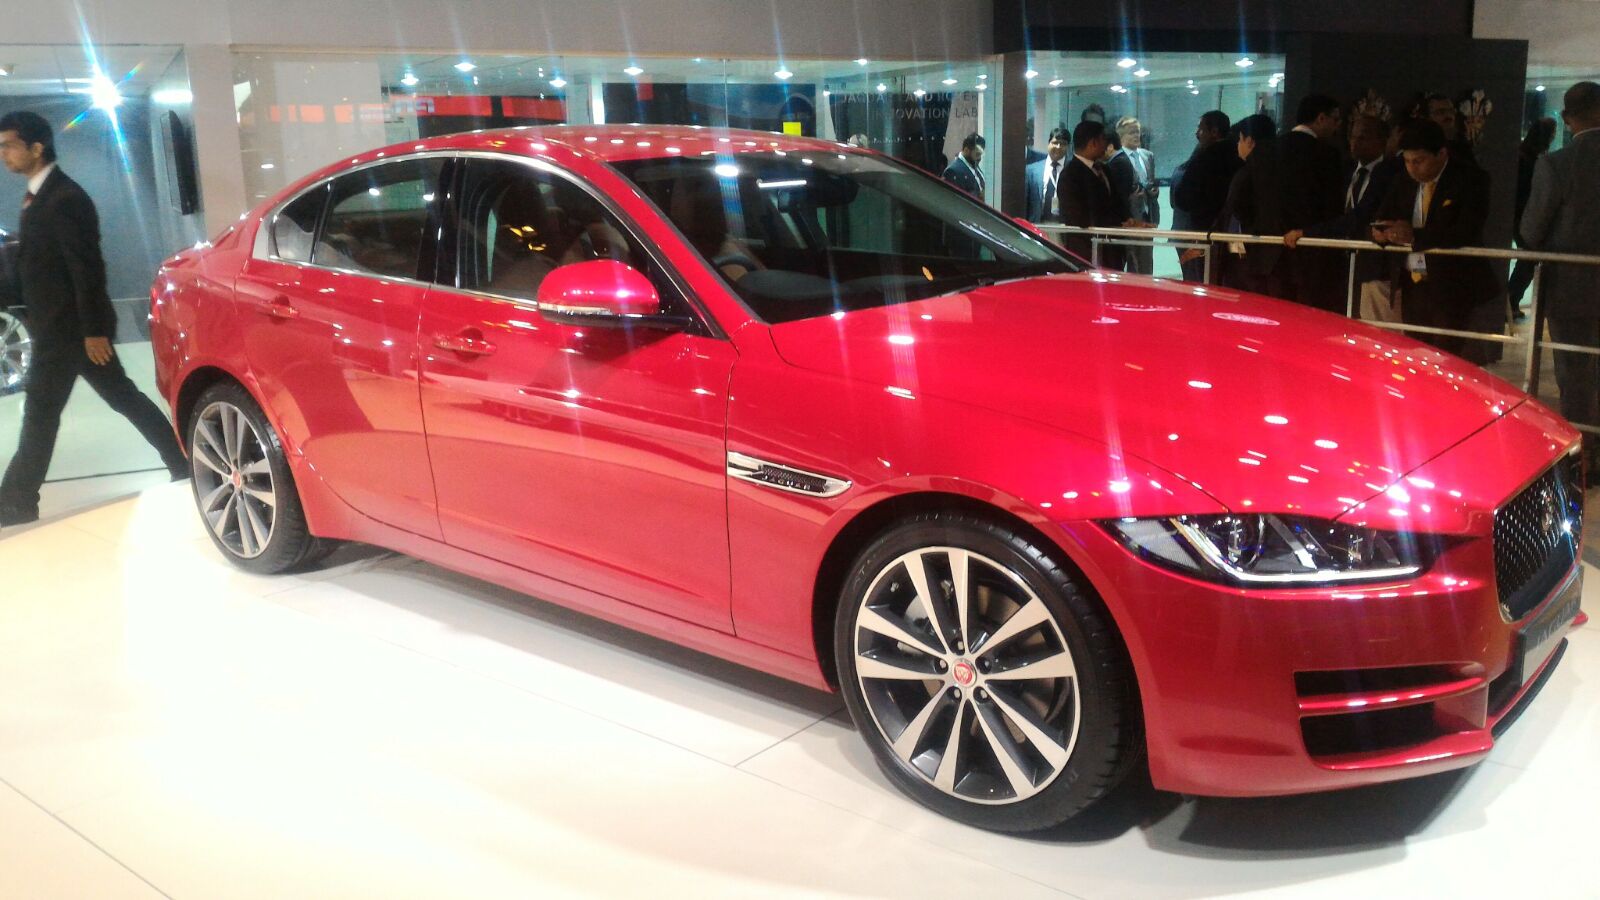 Jaguar Xe Launched In India At Inr 39 9 Lacs